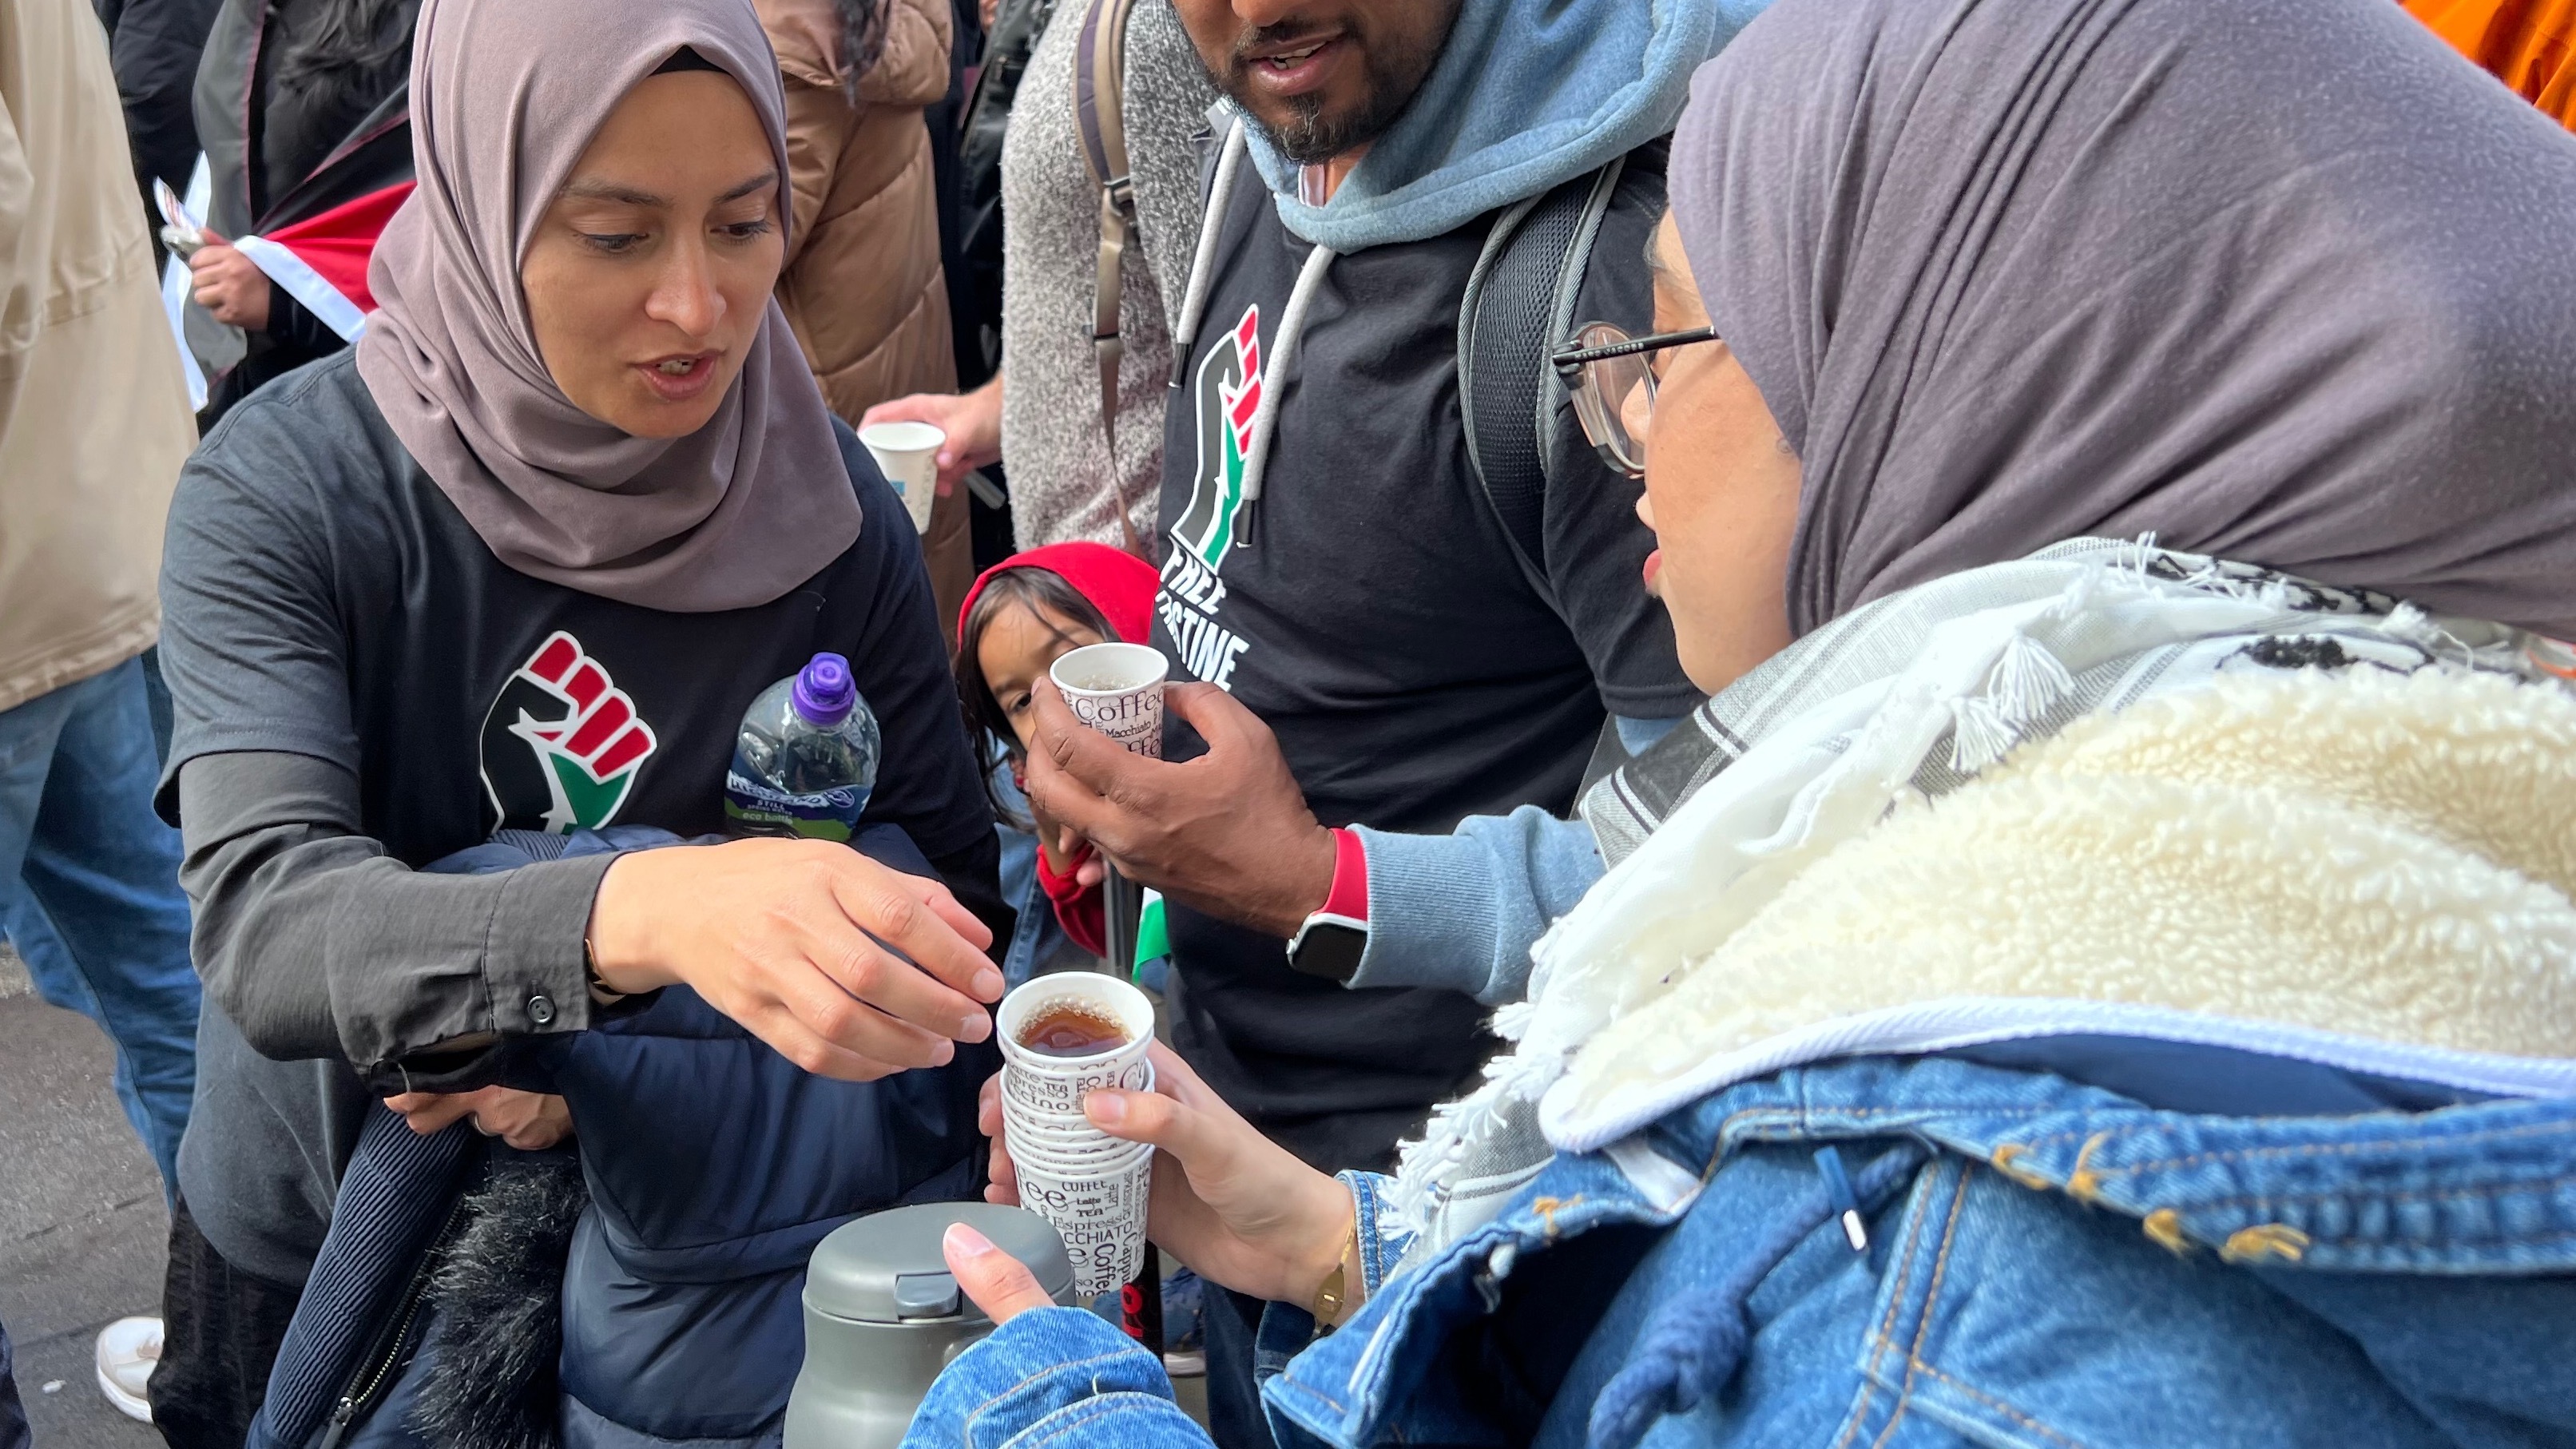 Amira handed out cups of tea to protestors in London during the pro-Palestine March (MEE/Areeb Ullah)